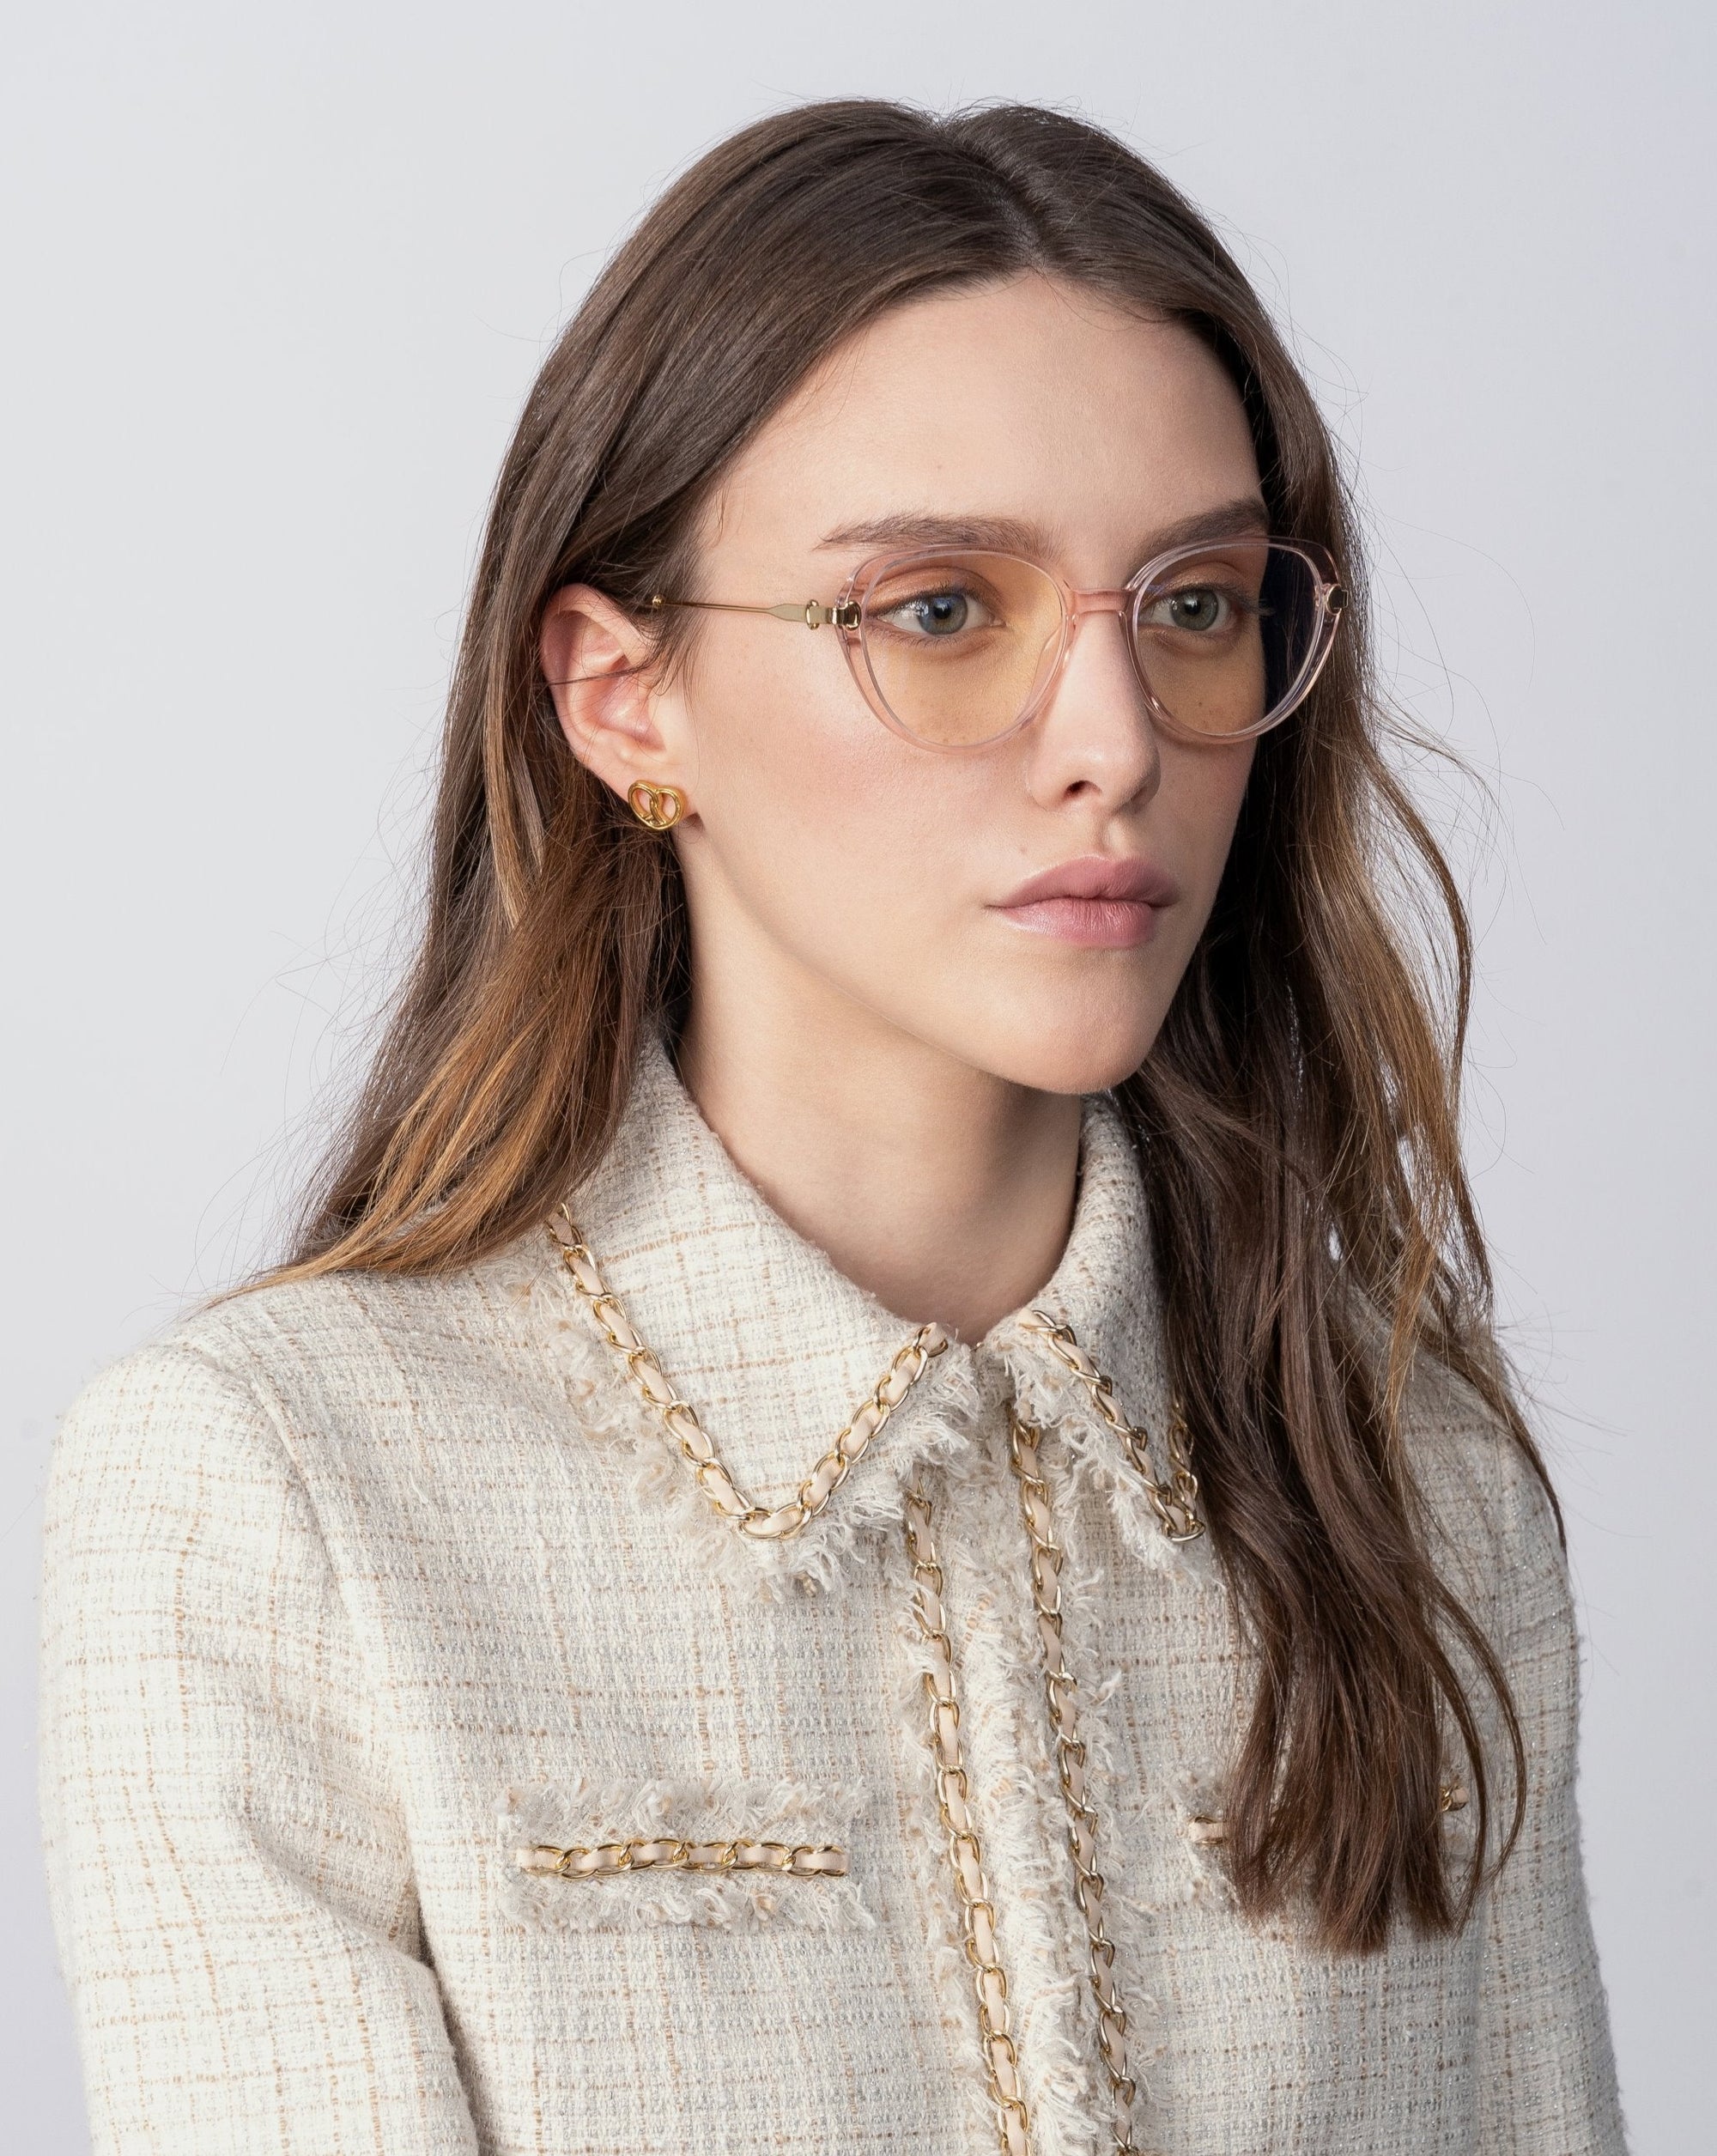 A woman with long, light brown hair is wearing a cream-colored tweed jacket with 18-karat gold-plated accents and a pair of For Art&#39;s Sake® Waterhouse clear-framed eyeglasses. She appears to be looking slightly to her left with a neutral expression against a plain white background.